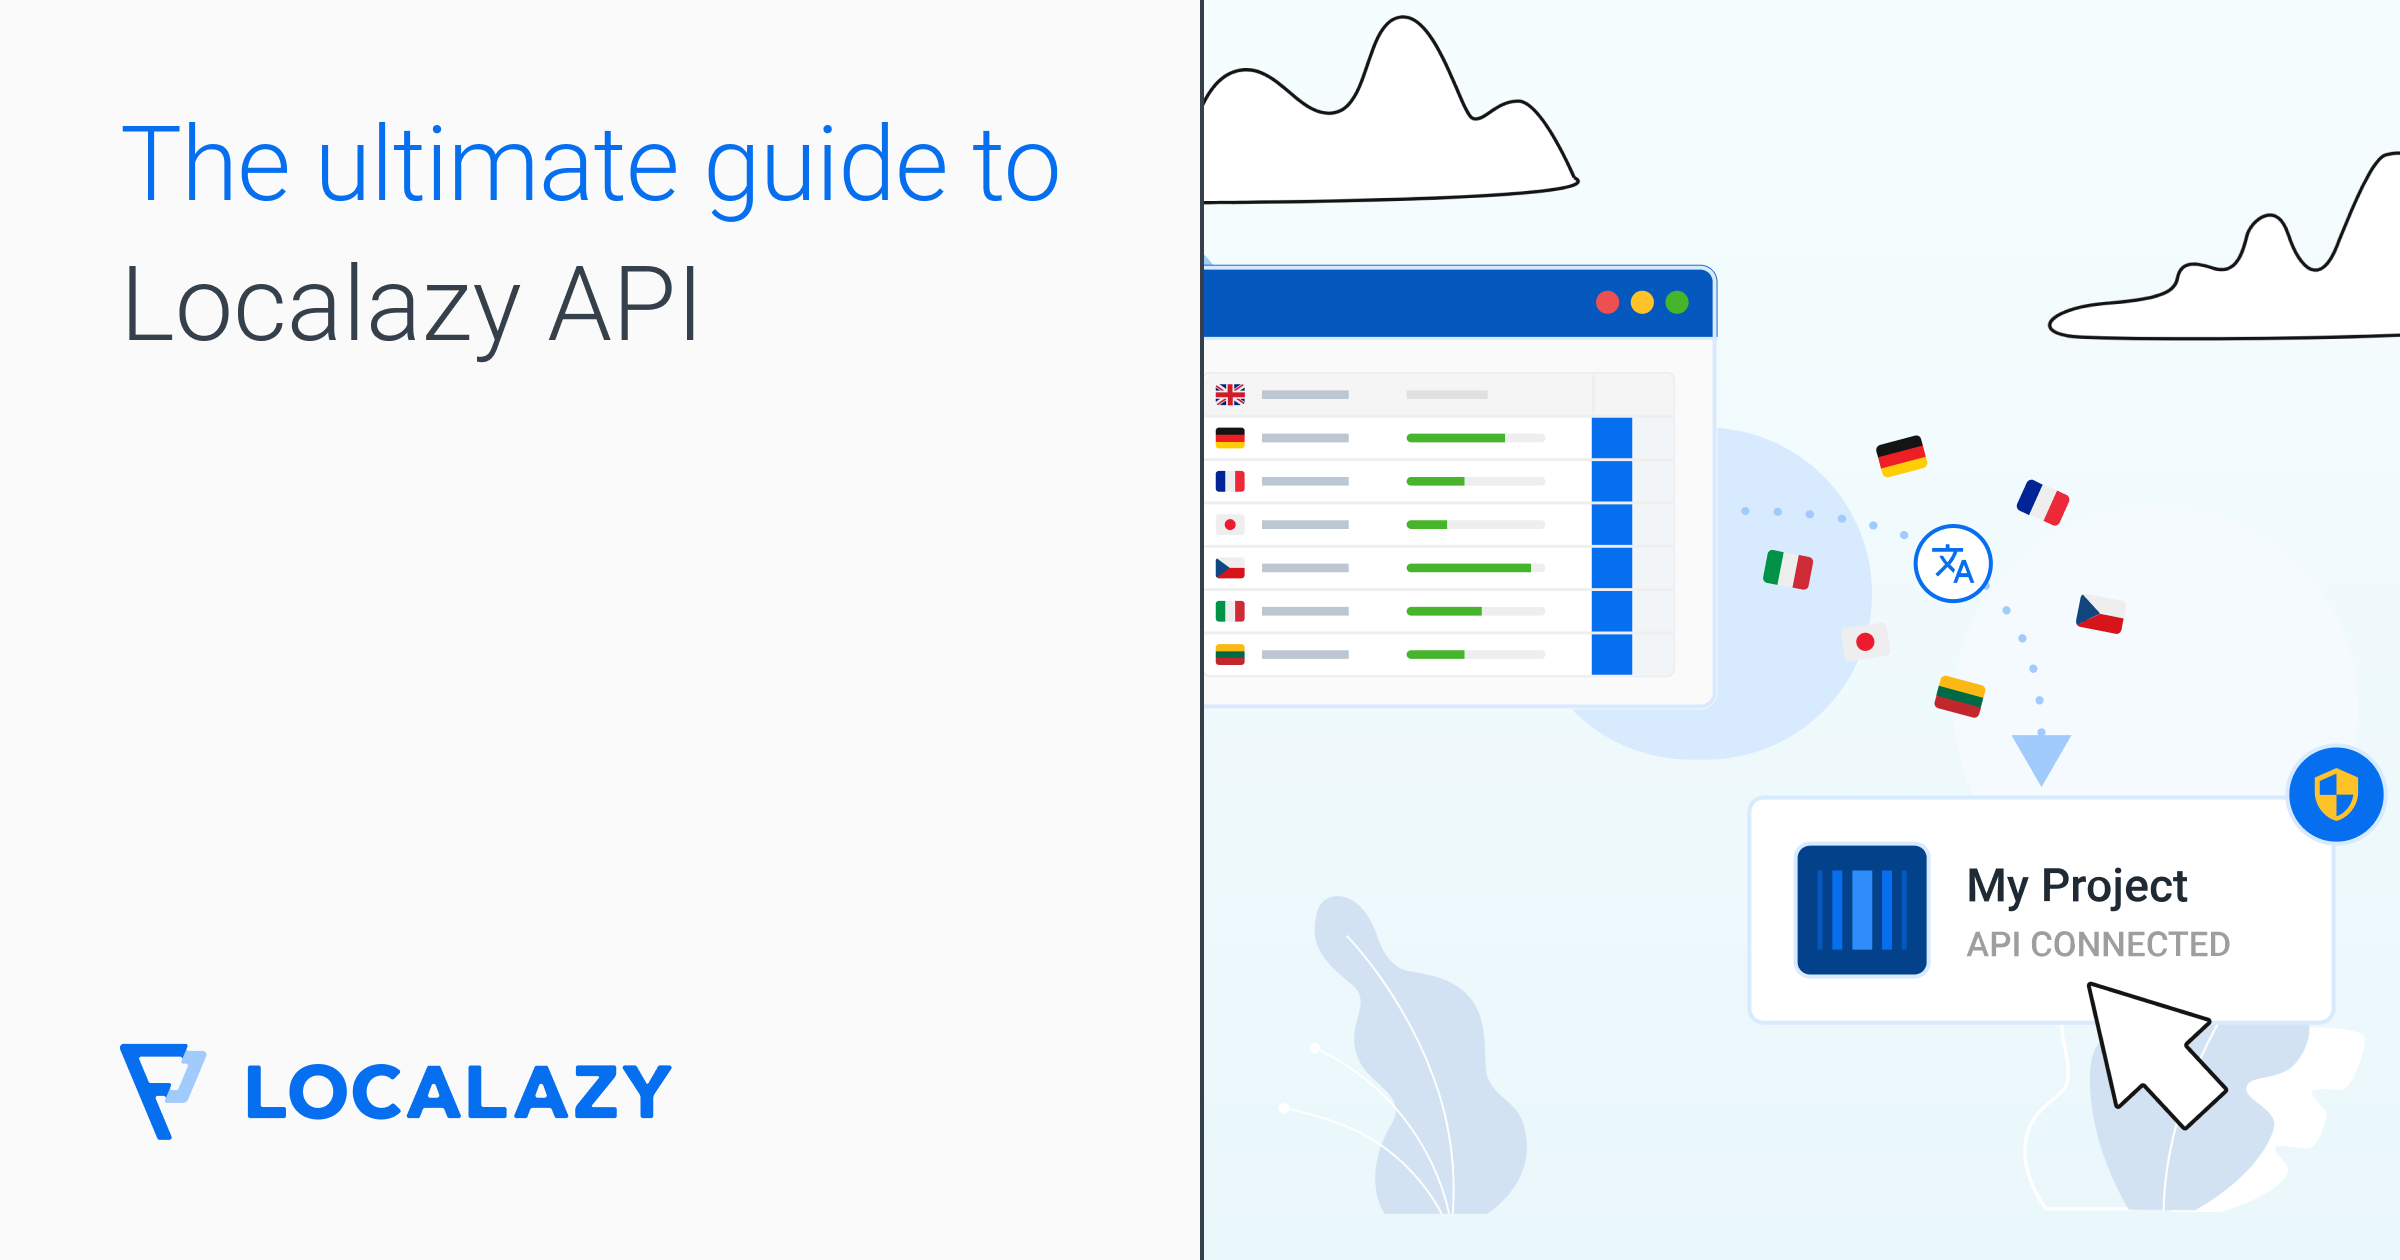 The ultimate guide to Localazy API